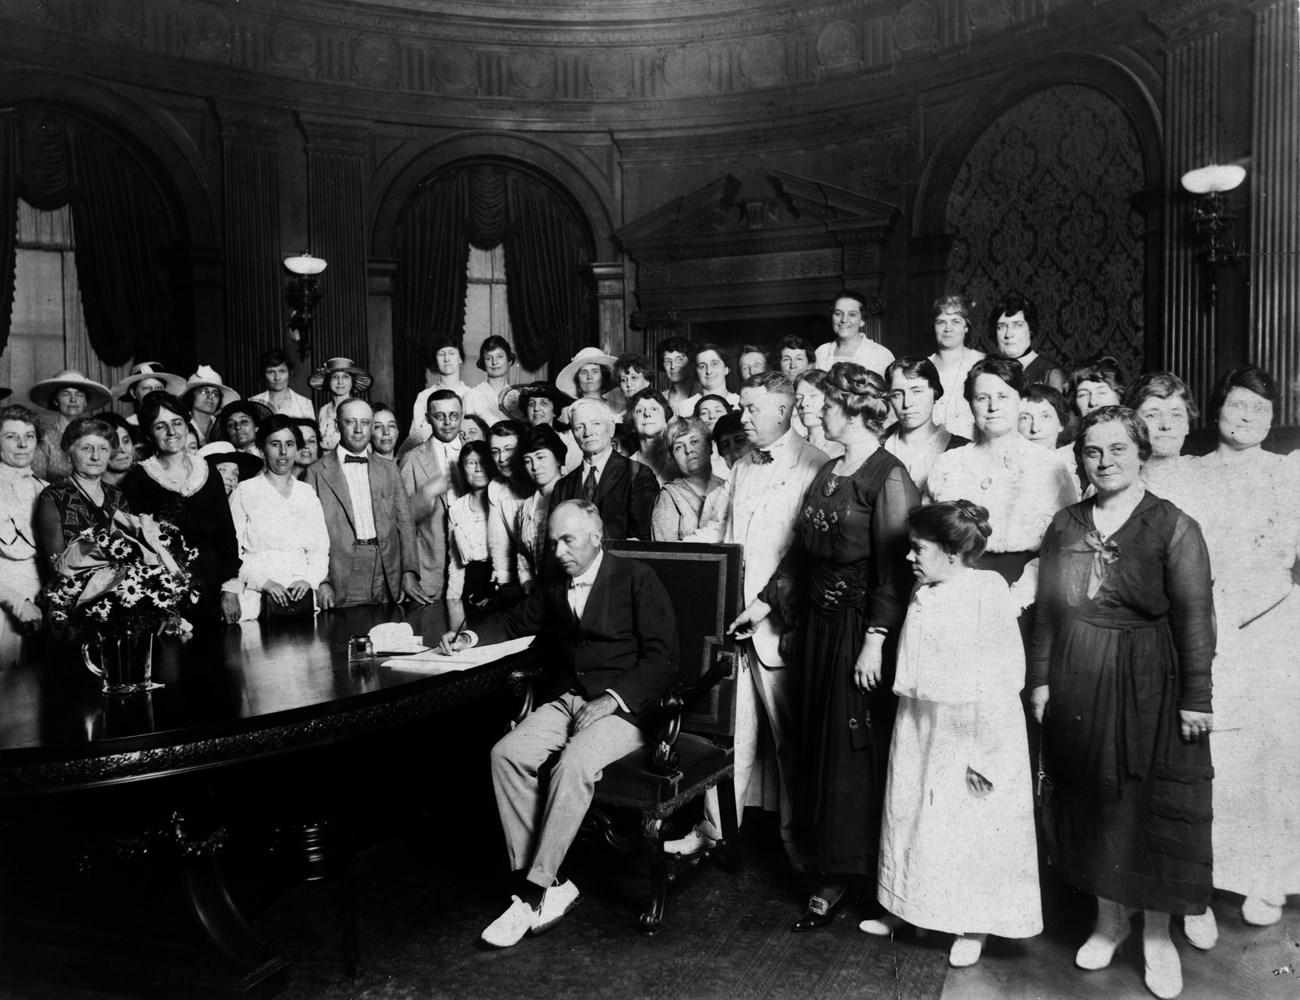 A historical photograph of a man in a crowded room surrounded by people signing a document.